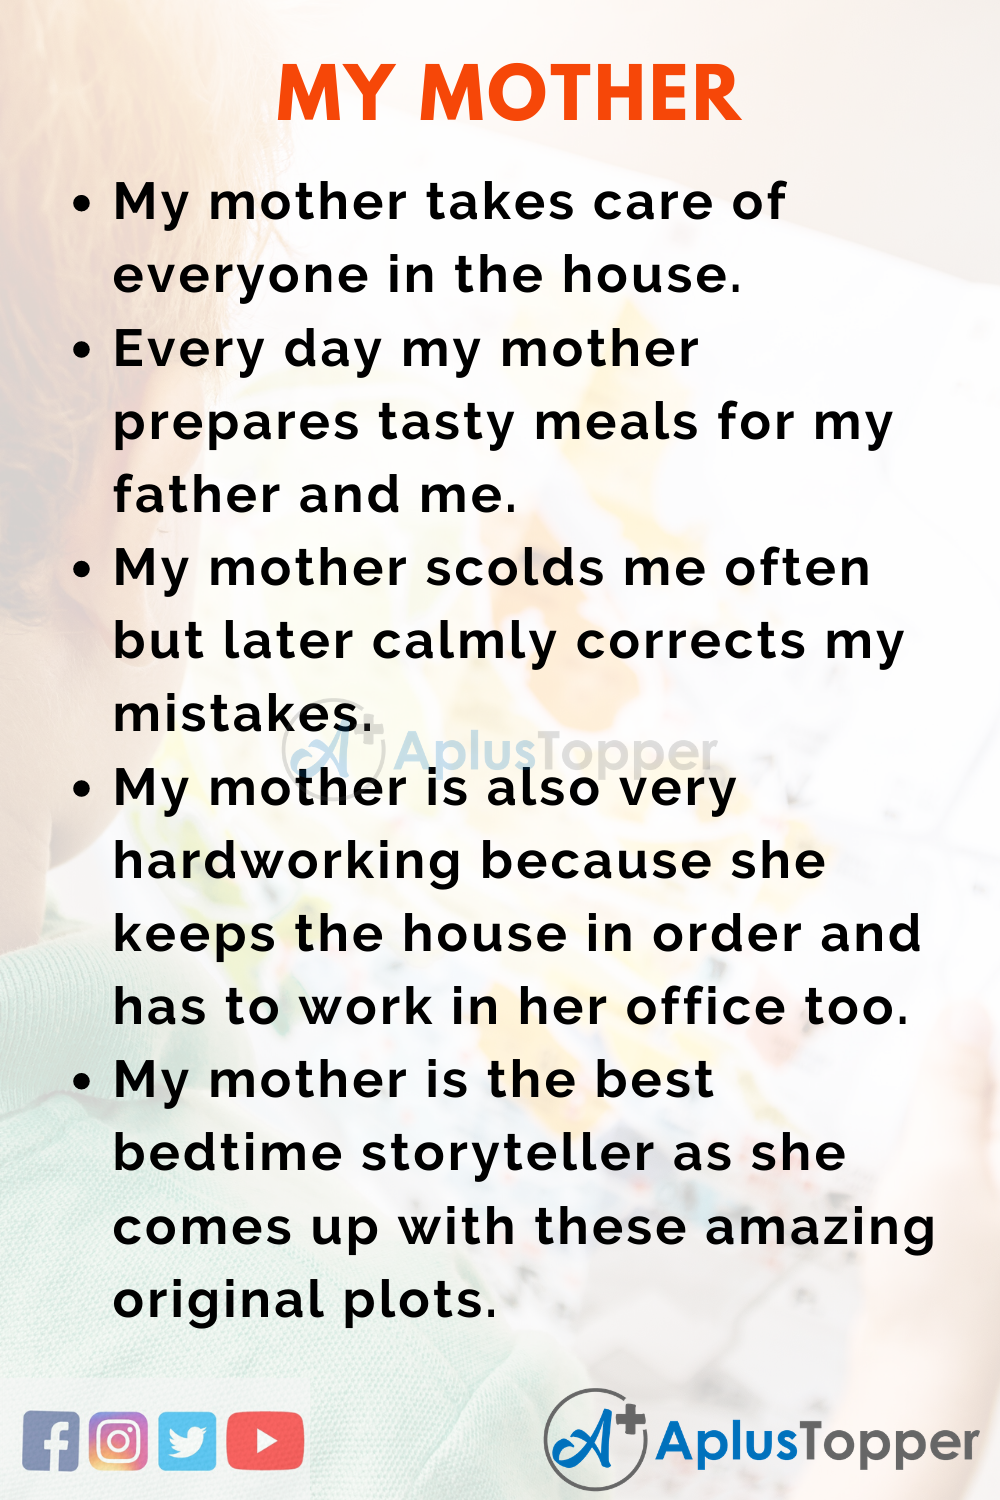 essay on mother for class 6